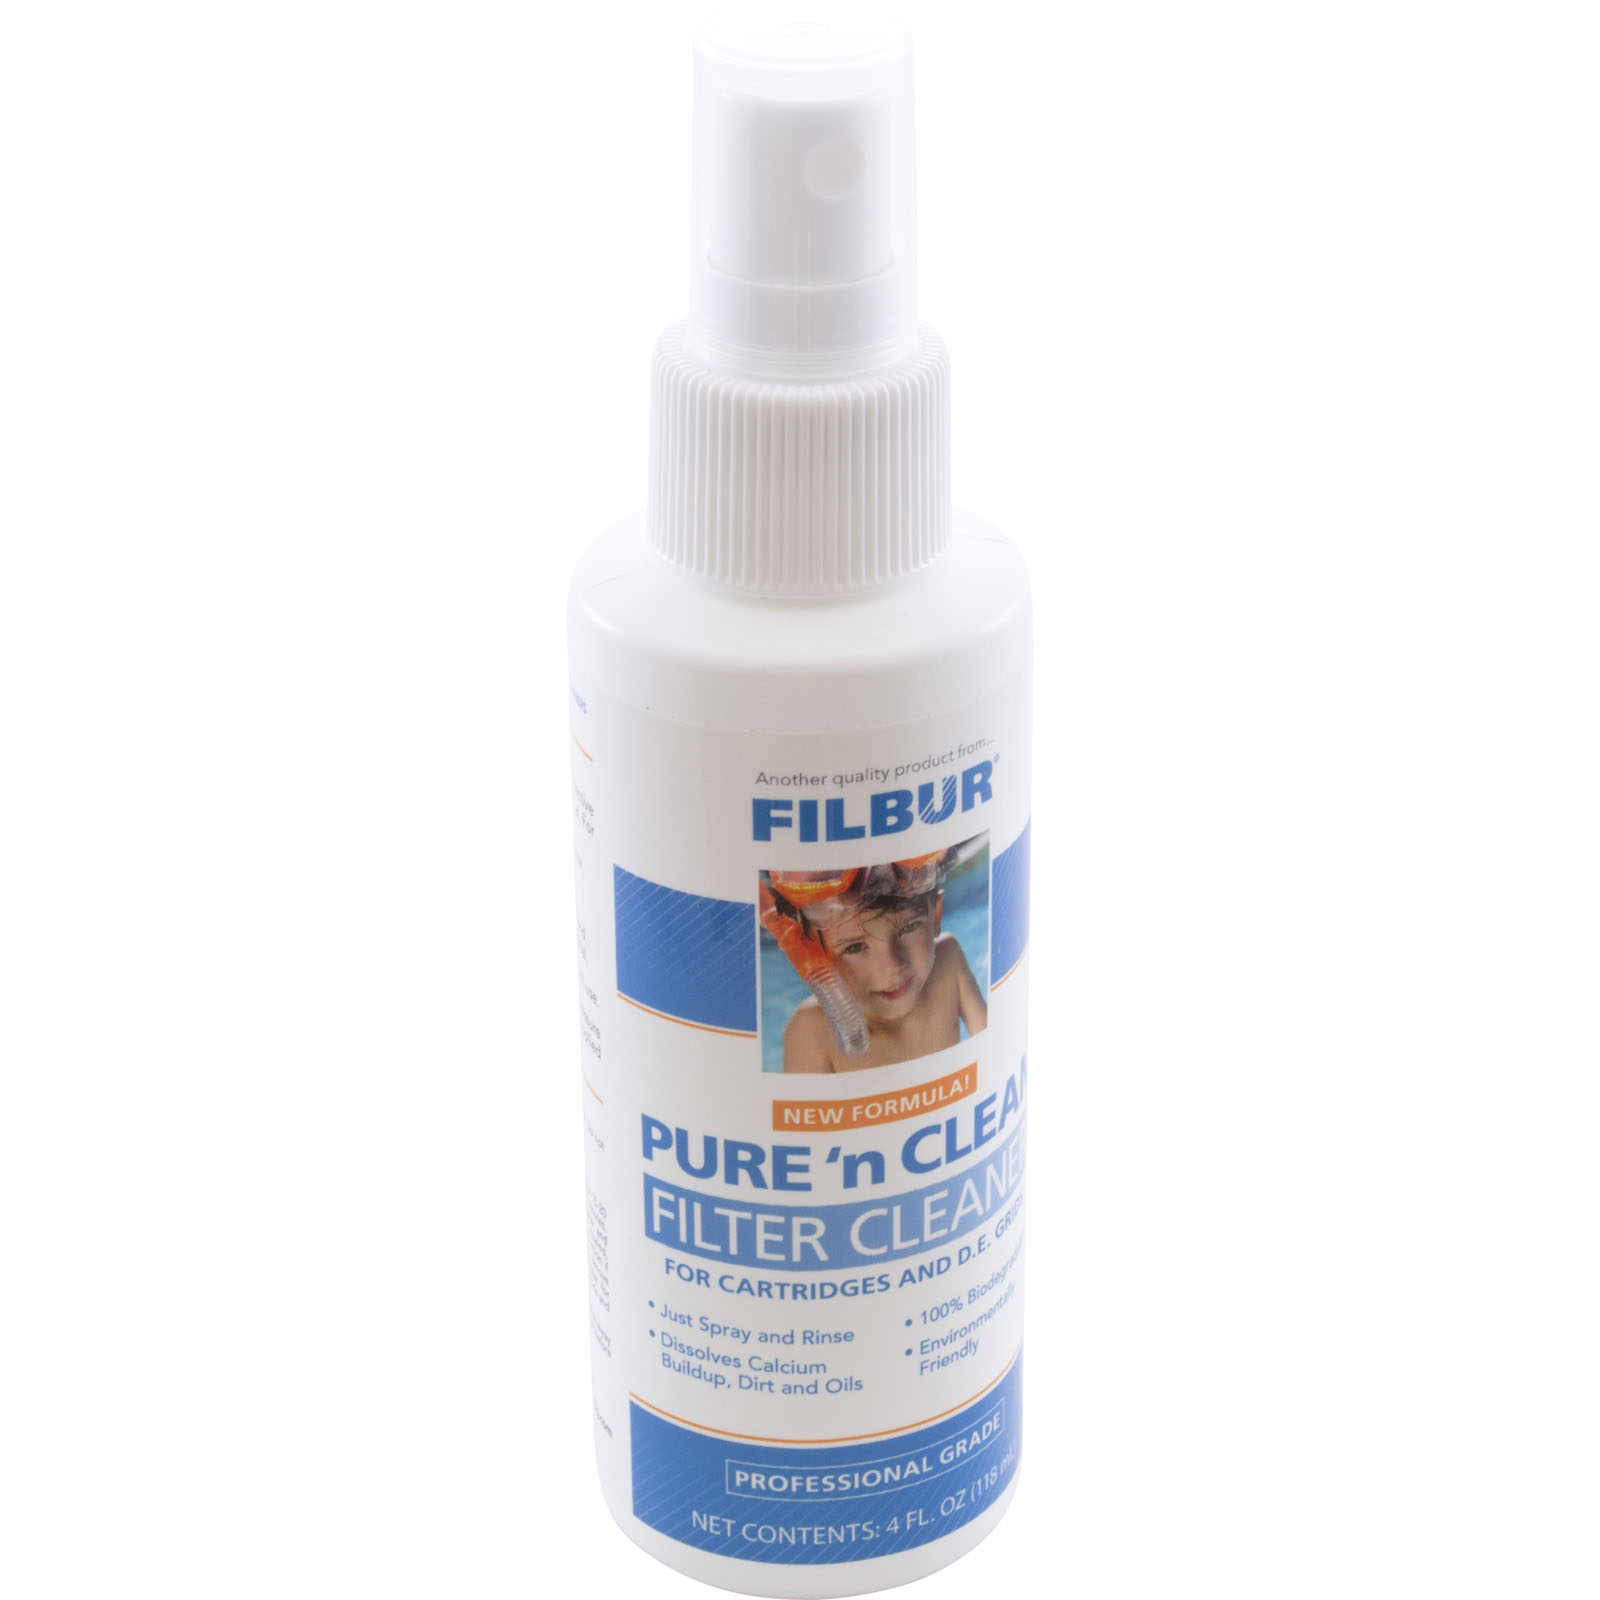 Picture of Cartridge and Grid Cleaner, Filbur, Pure and Clean, 4oz.